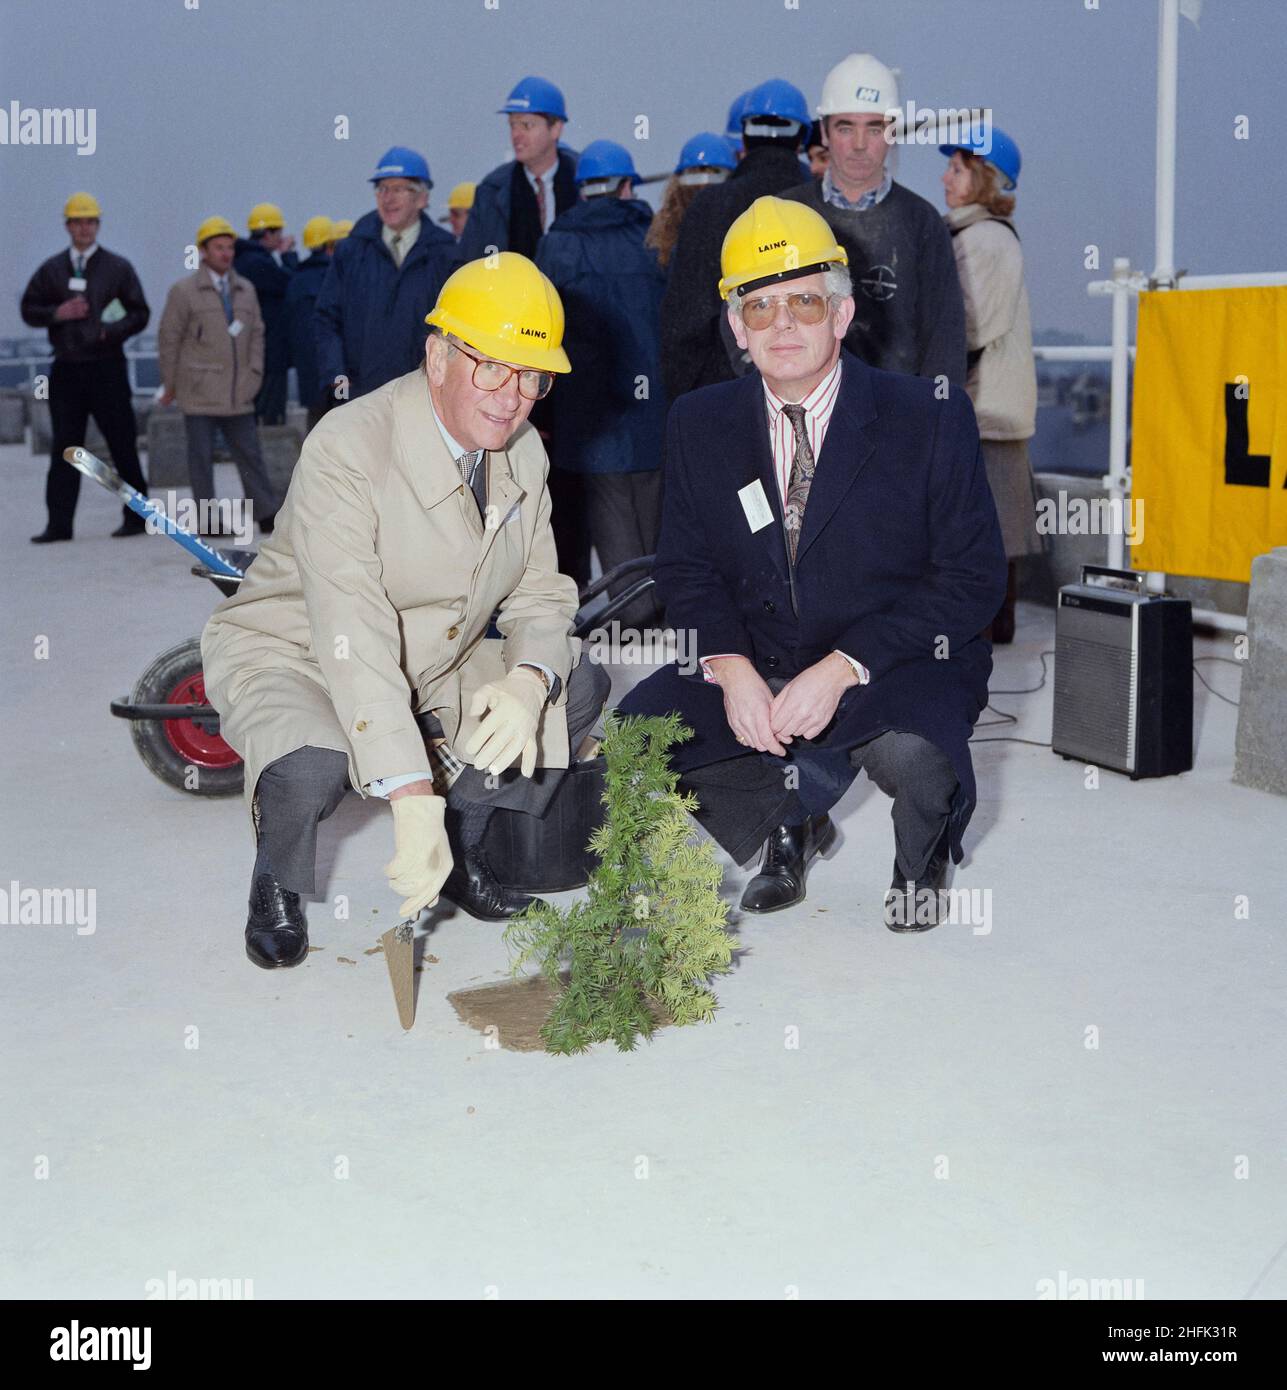 Chelsea and Westminster Hospital, Fulham Road, Kensington and Chelsea, London, 28/01/1991. Sir William Doughty and John Allen crouched beside a coniferous sprig planted in concrete during the topping out ceremony at Chelsea and Westminster Hospital. Laing Management Contracting worked on the construction of Chelsea and Westminster Hospital on behalf of the North West Thames Regional Health Authority between 1989 and 1993. The new teaching hospital was built on the site of the old St Stephen&#x2019;s Hospital, which was demolished in the early months of 1989. The use of fast track construction Stock Photo